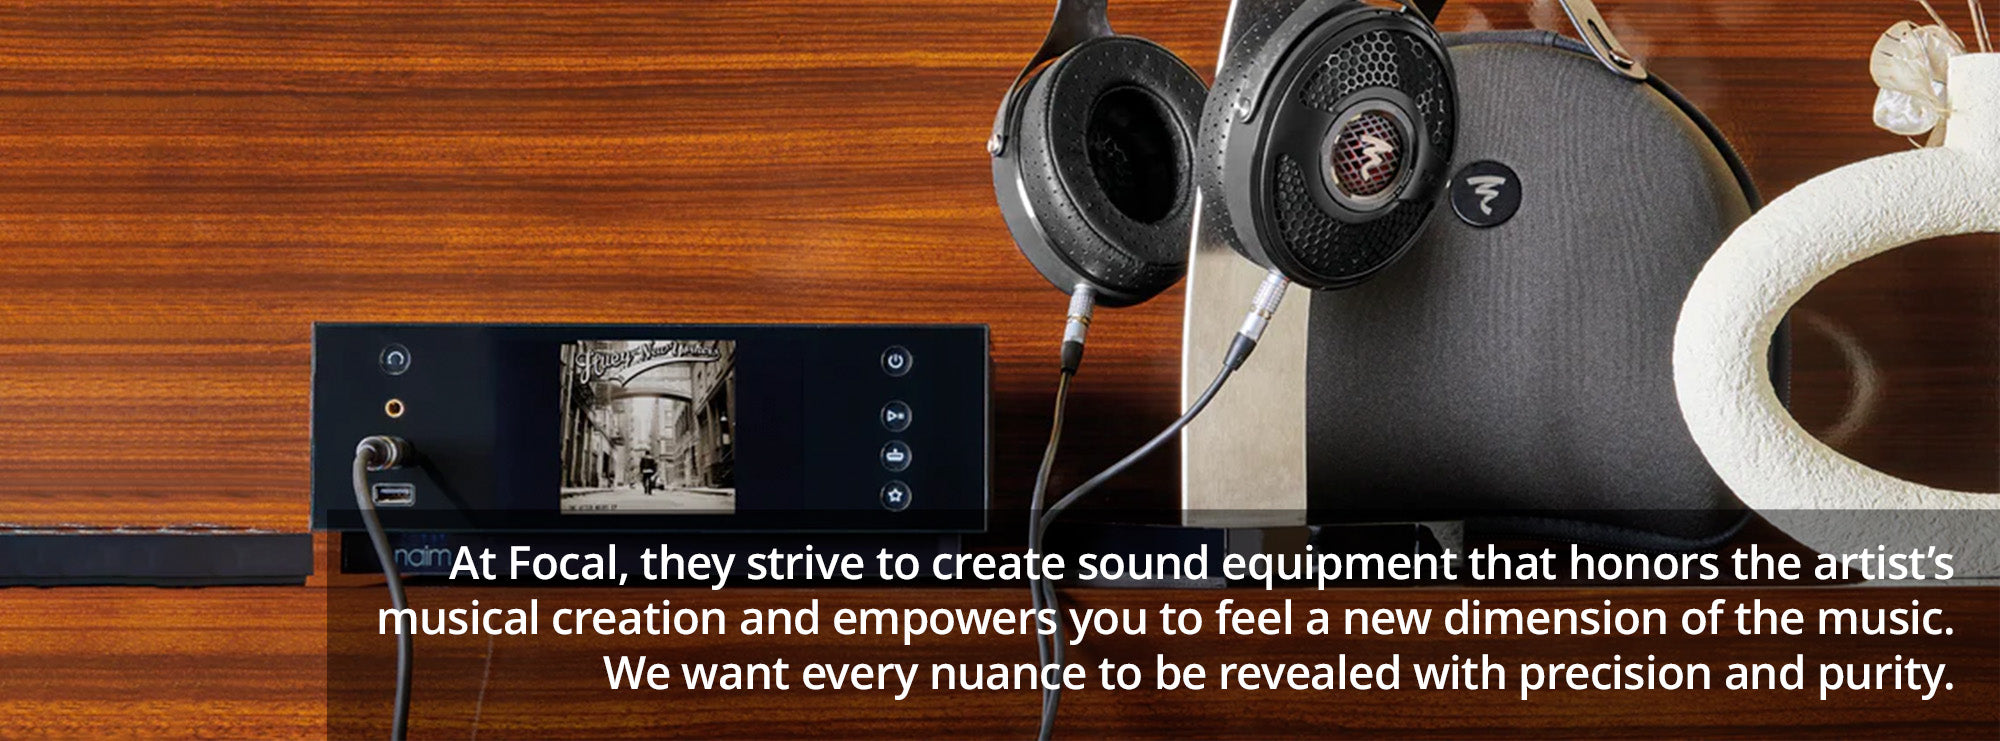 At Focal, they strive to create sound equipment that honors the artist’s musical creation and empowers you to feel a new dimension of the music. We want every nuance to be revealed with precision and purity.